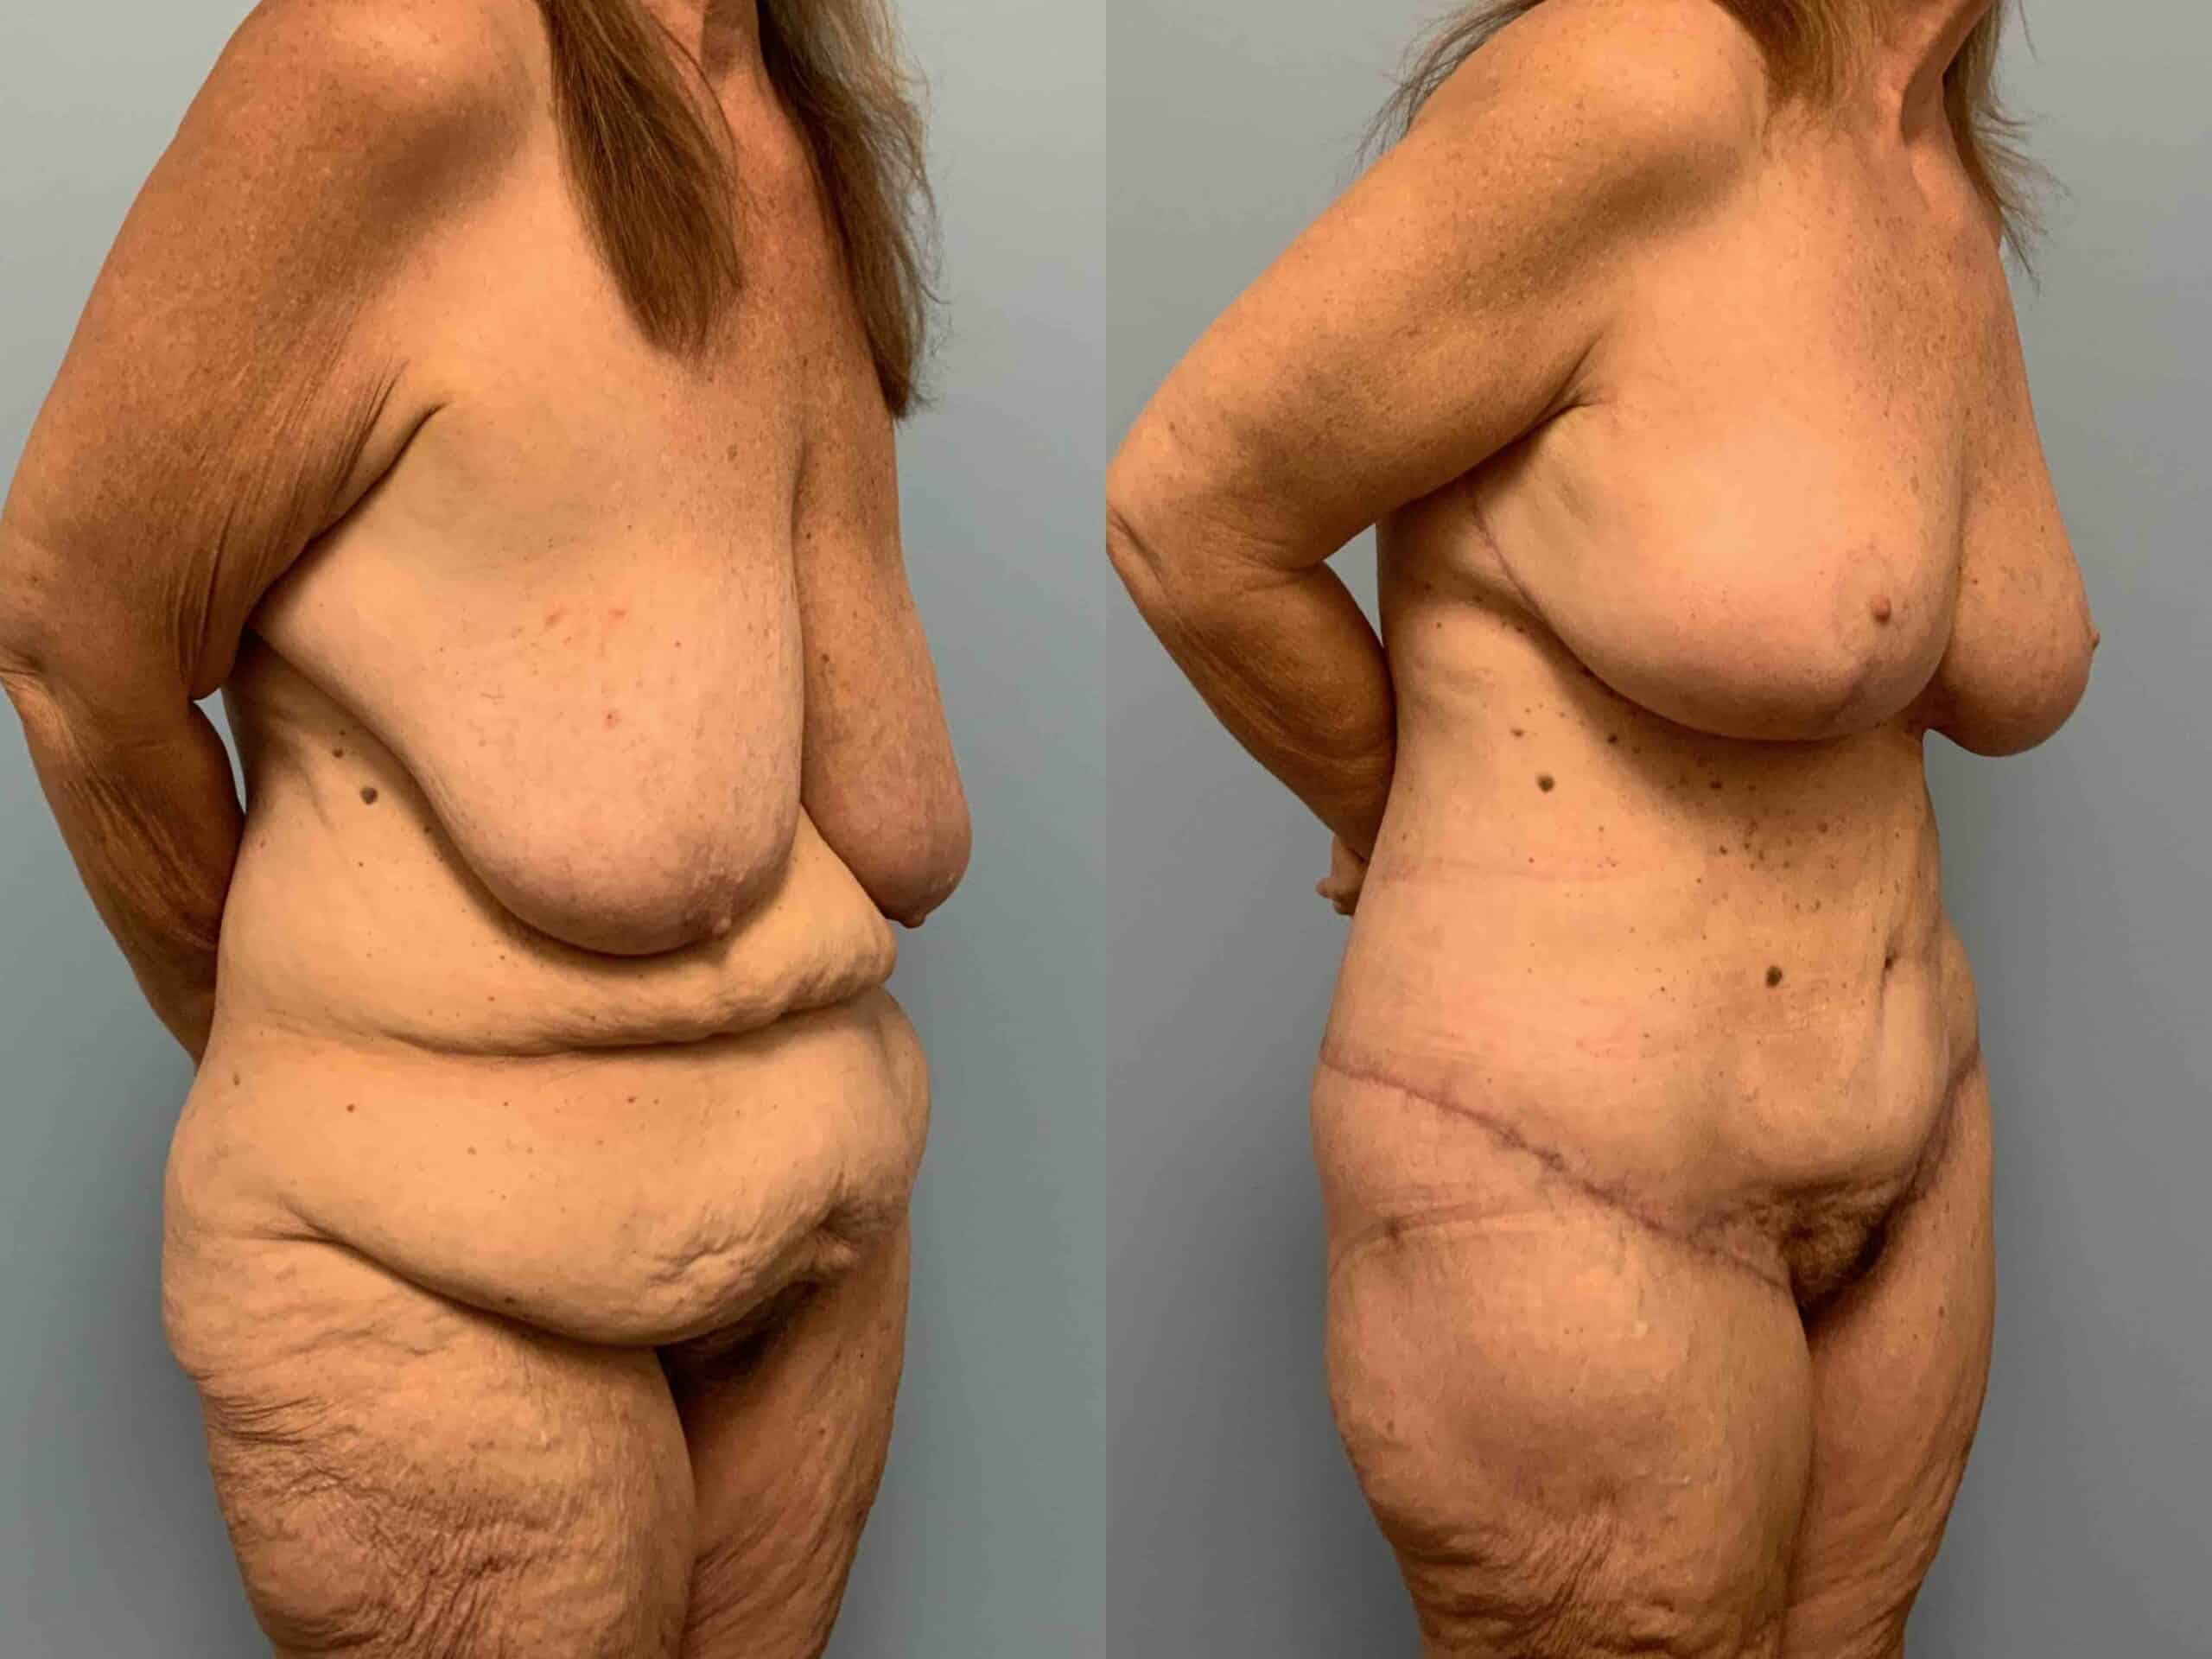 Before and after, patient 2 mo post op from VASER Abdomen, Renuvion Abdomen, Axilla & Mons, Axillary Roll Resection, Breast Reduction, Tummy Tuck procedures performed by Dr. Paul Vanek